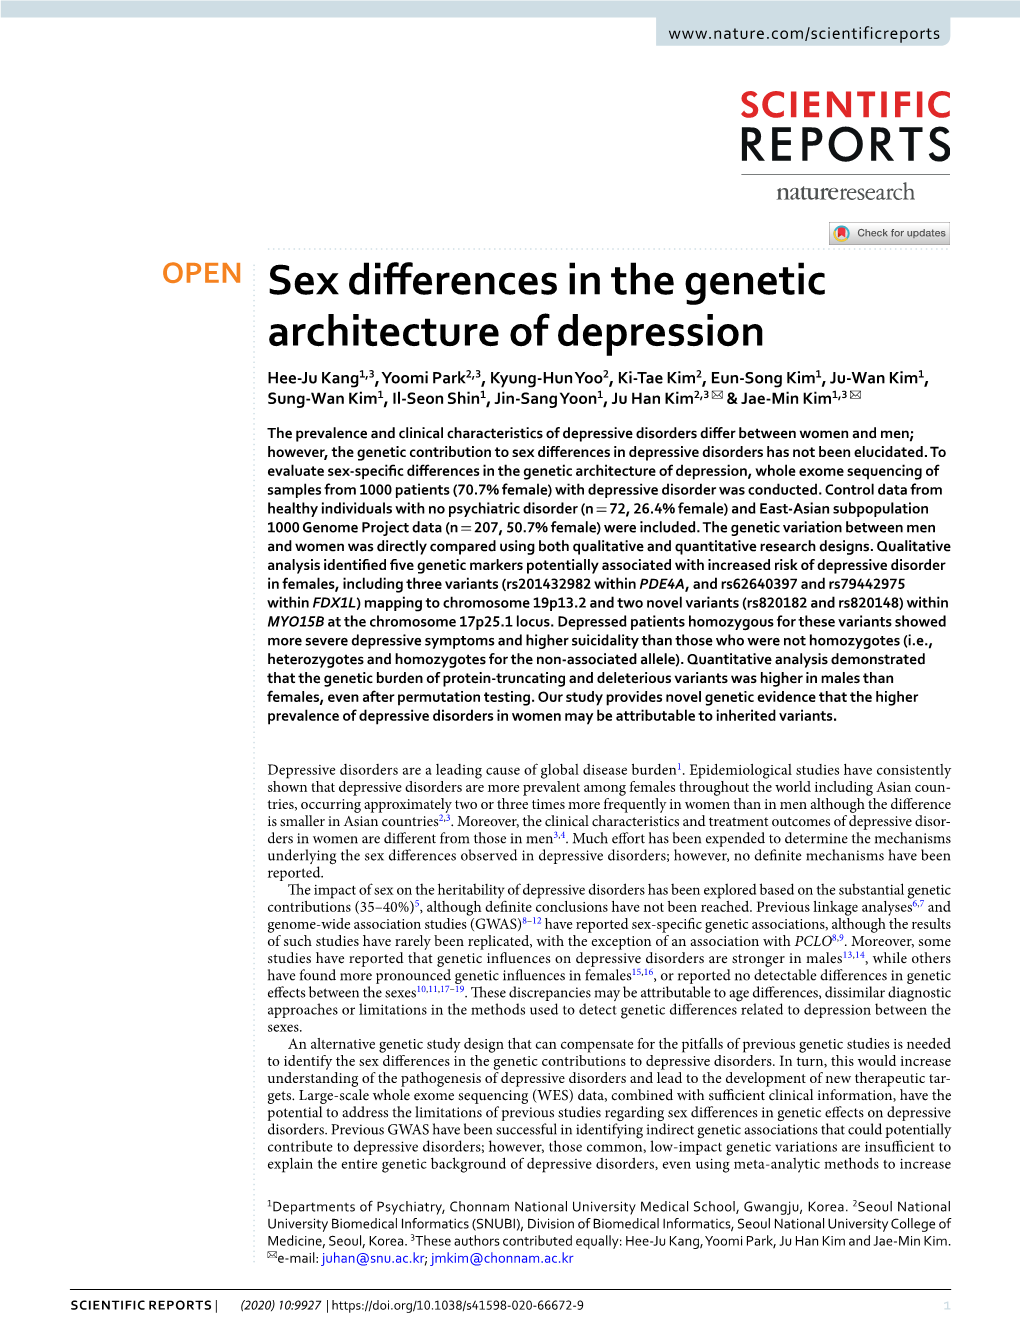 Sex Differences in the Genetic Architecture of Depression